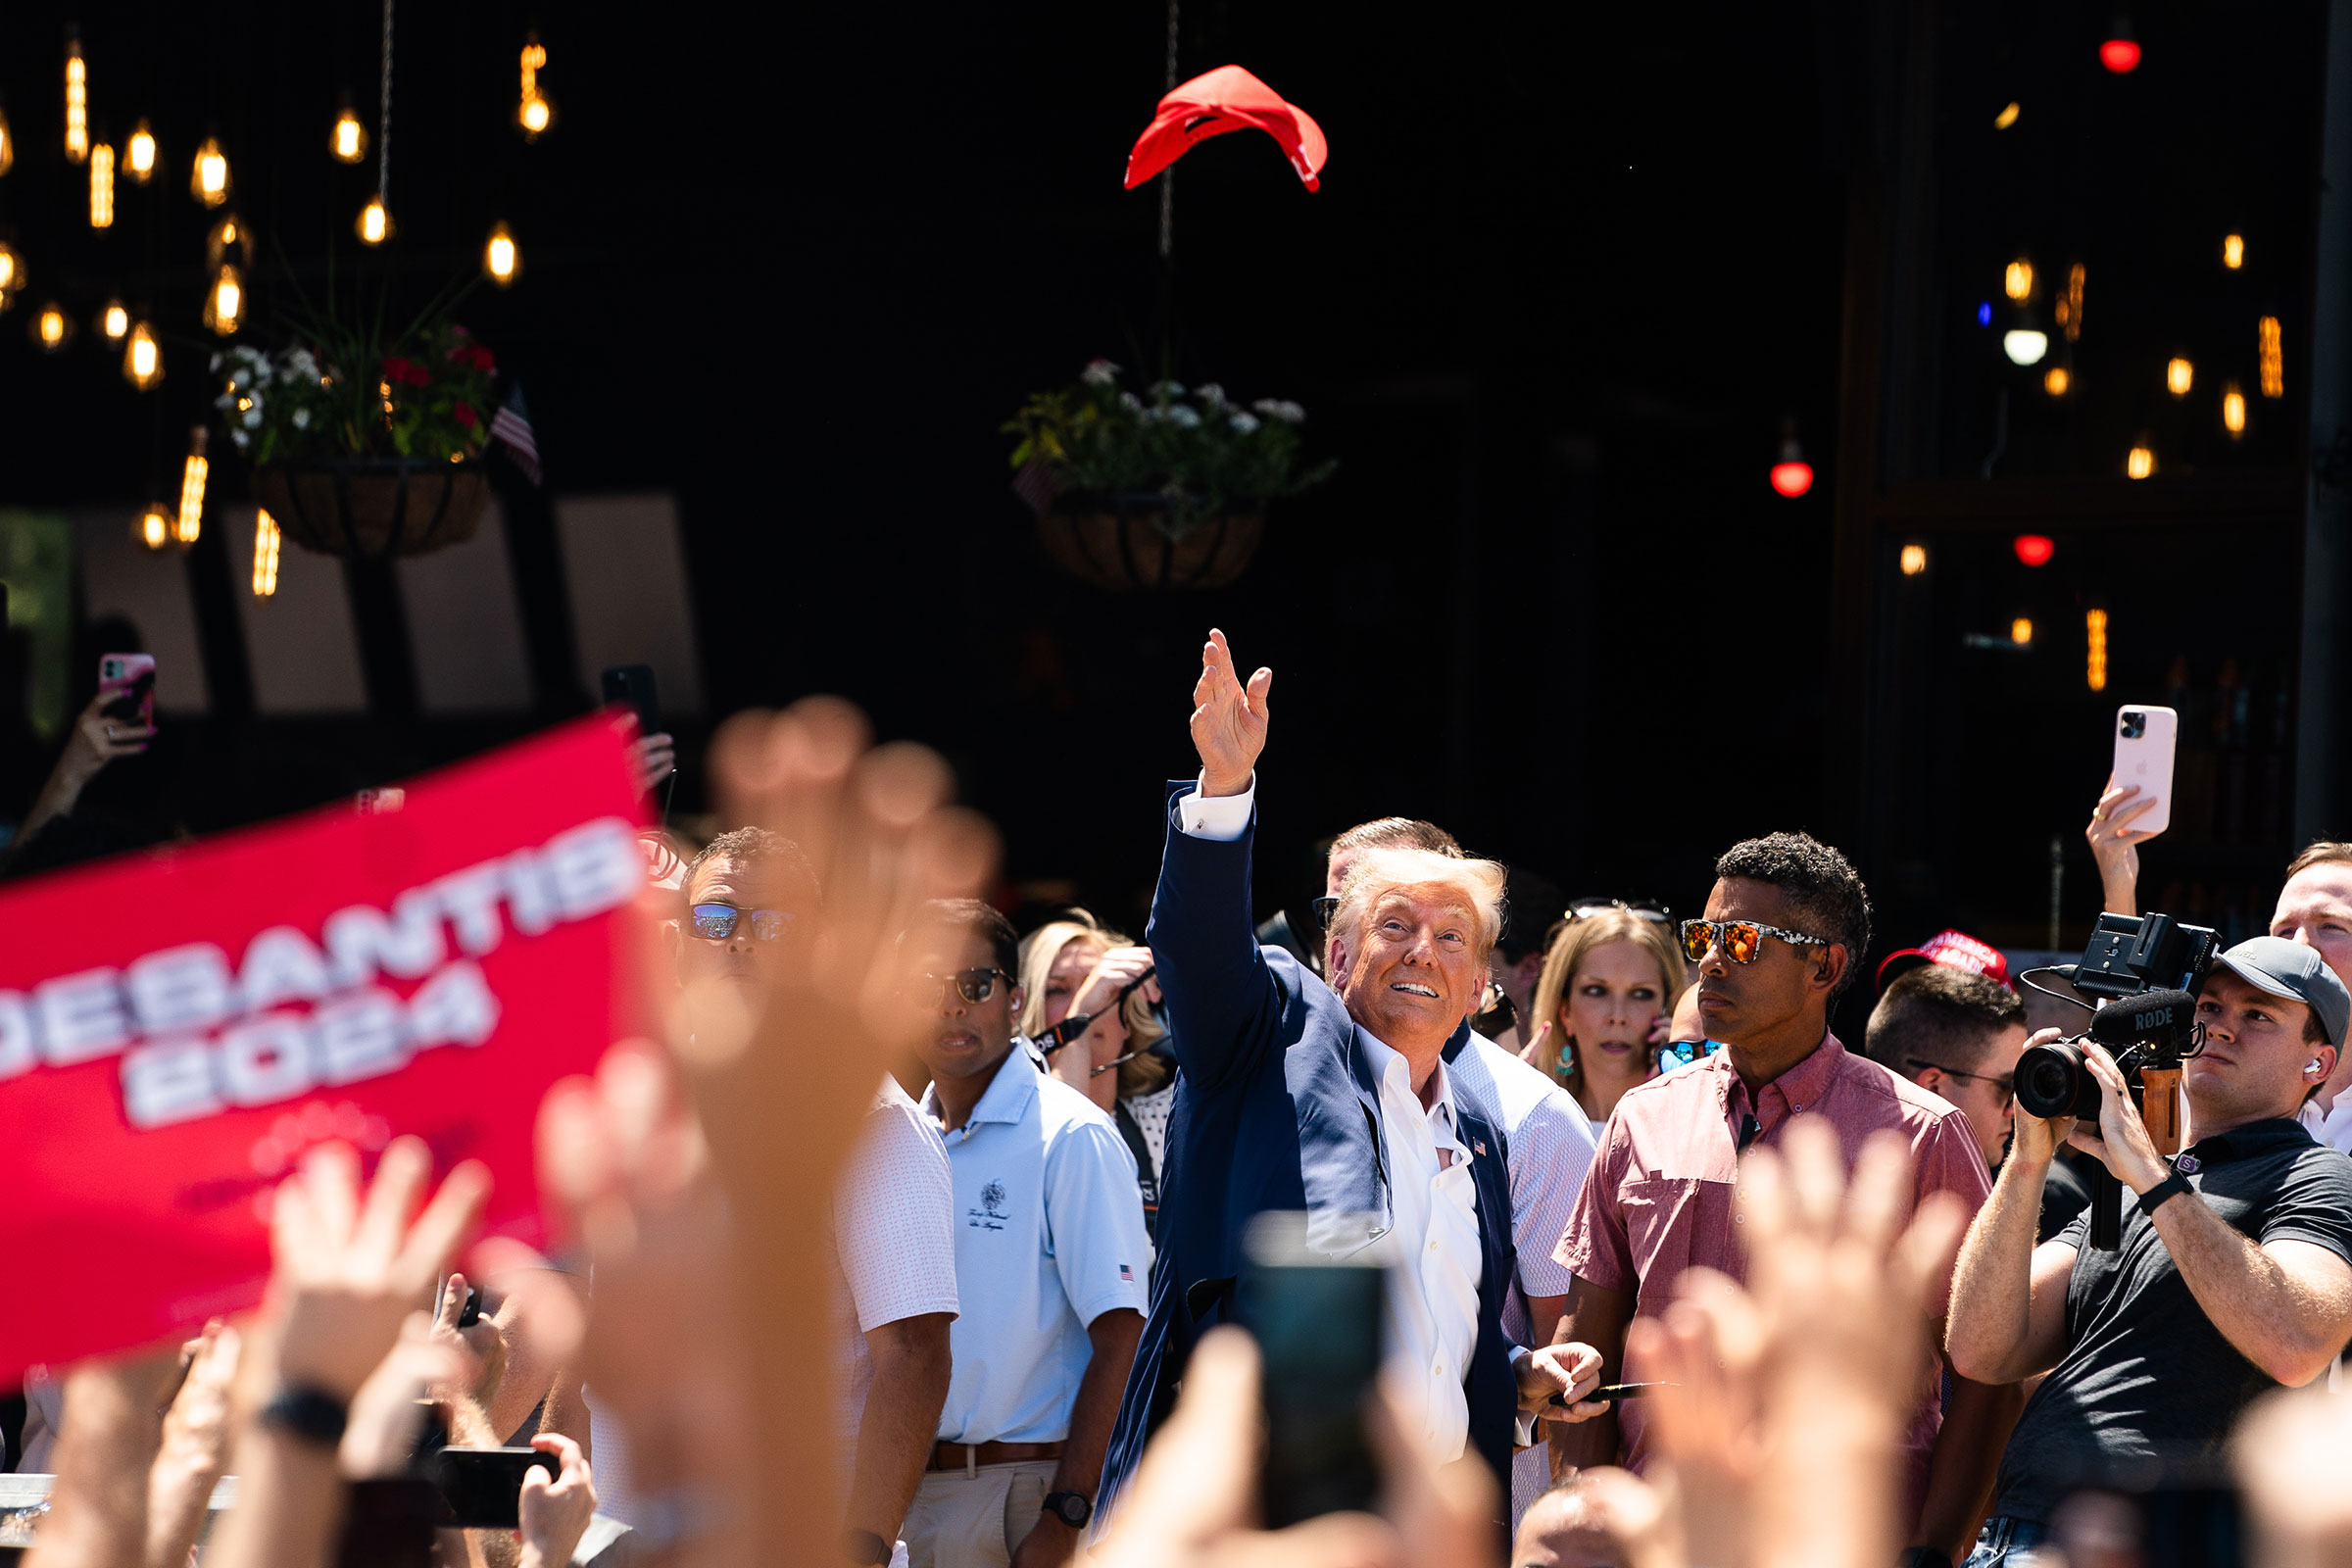 Former President Donald Trump tosses a hat in the air while supporters cheer for him on Aug. 12. (Demetrius Freeman—The Washington Post/Getty Images)